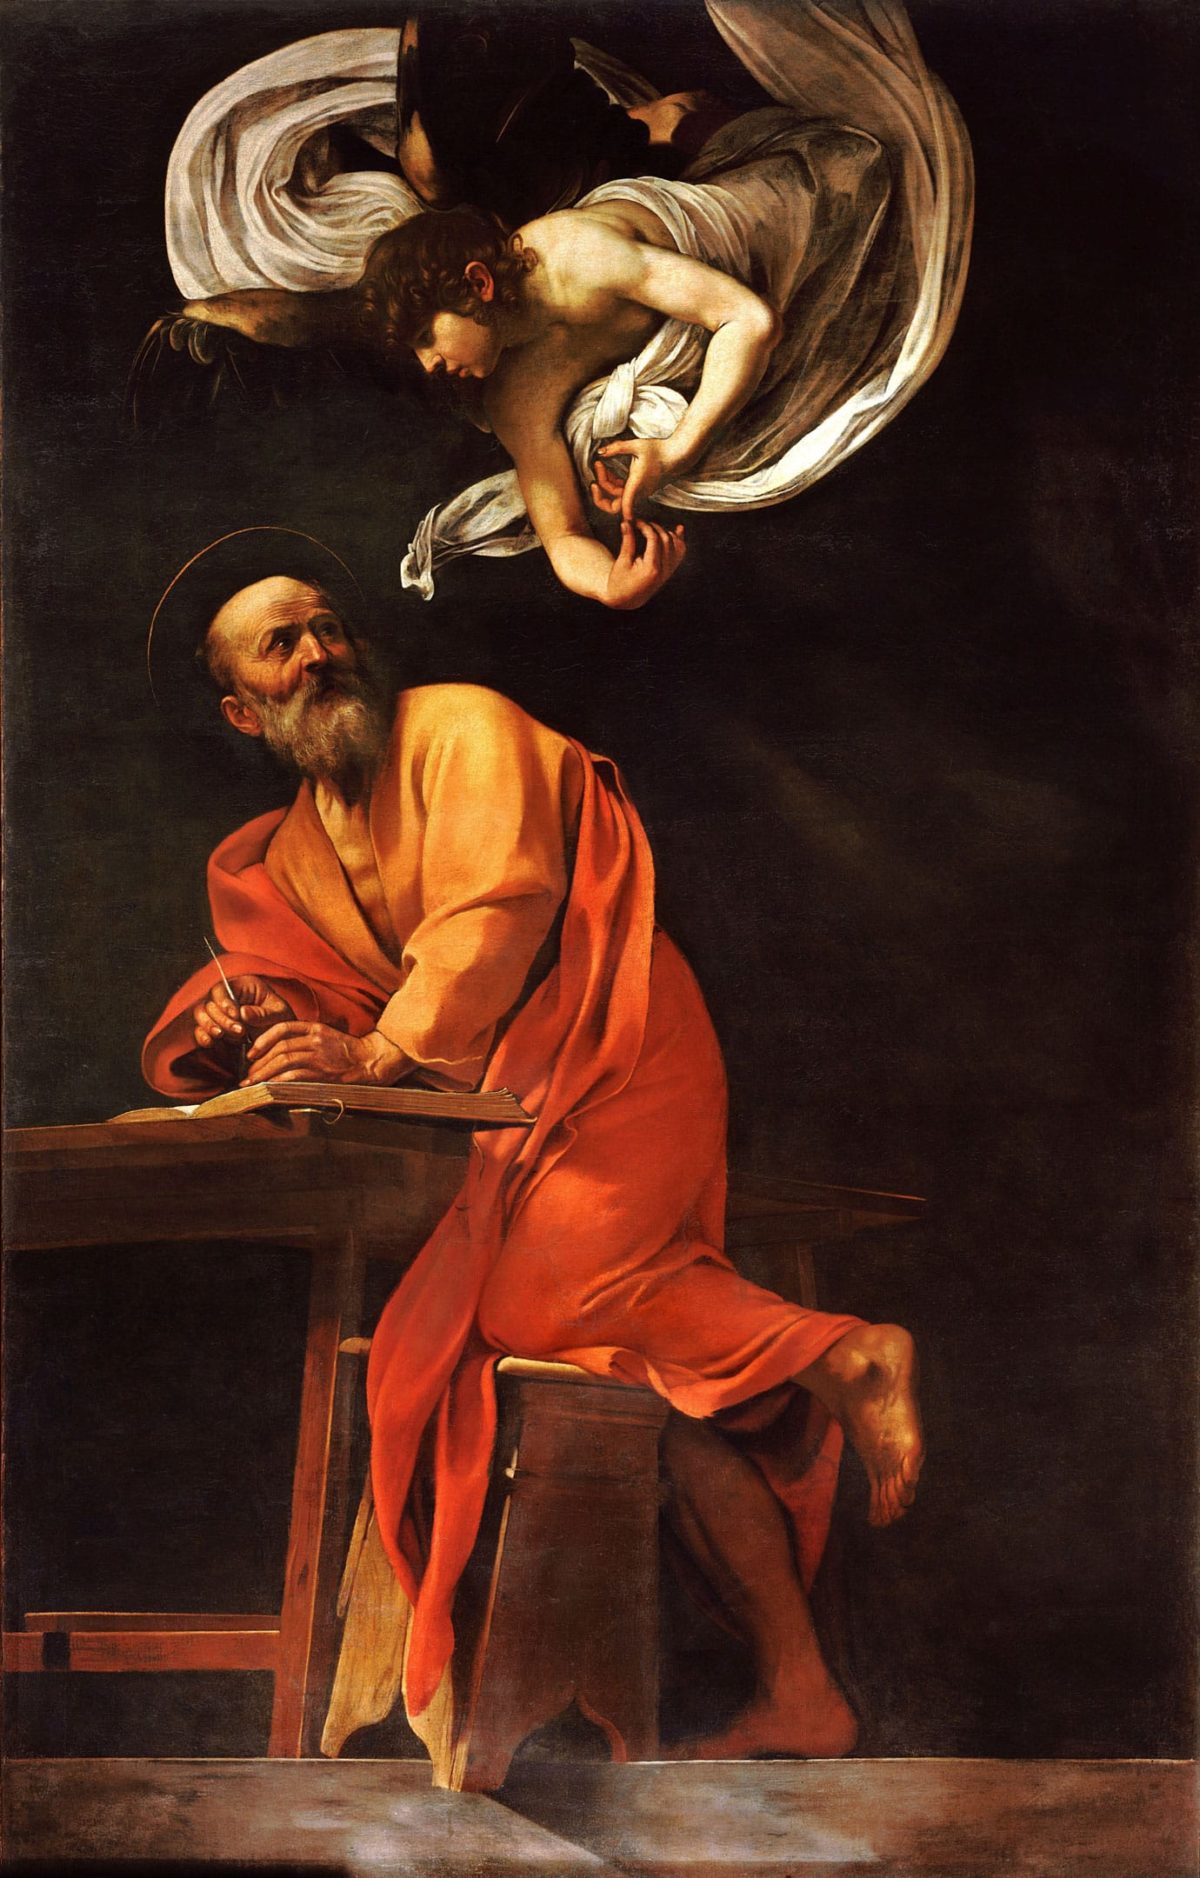 Painting of "The Inspiration of Saint Matthew" by Caravaggio (1602)